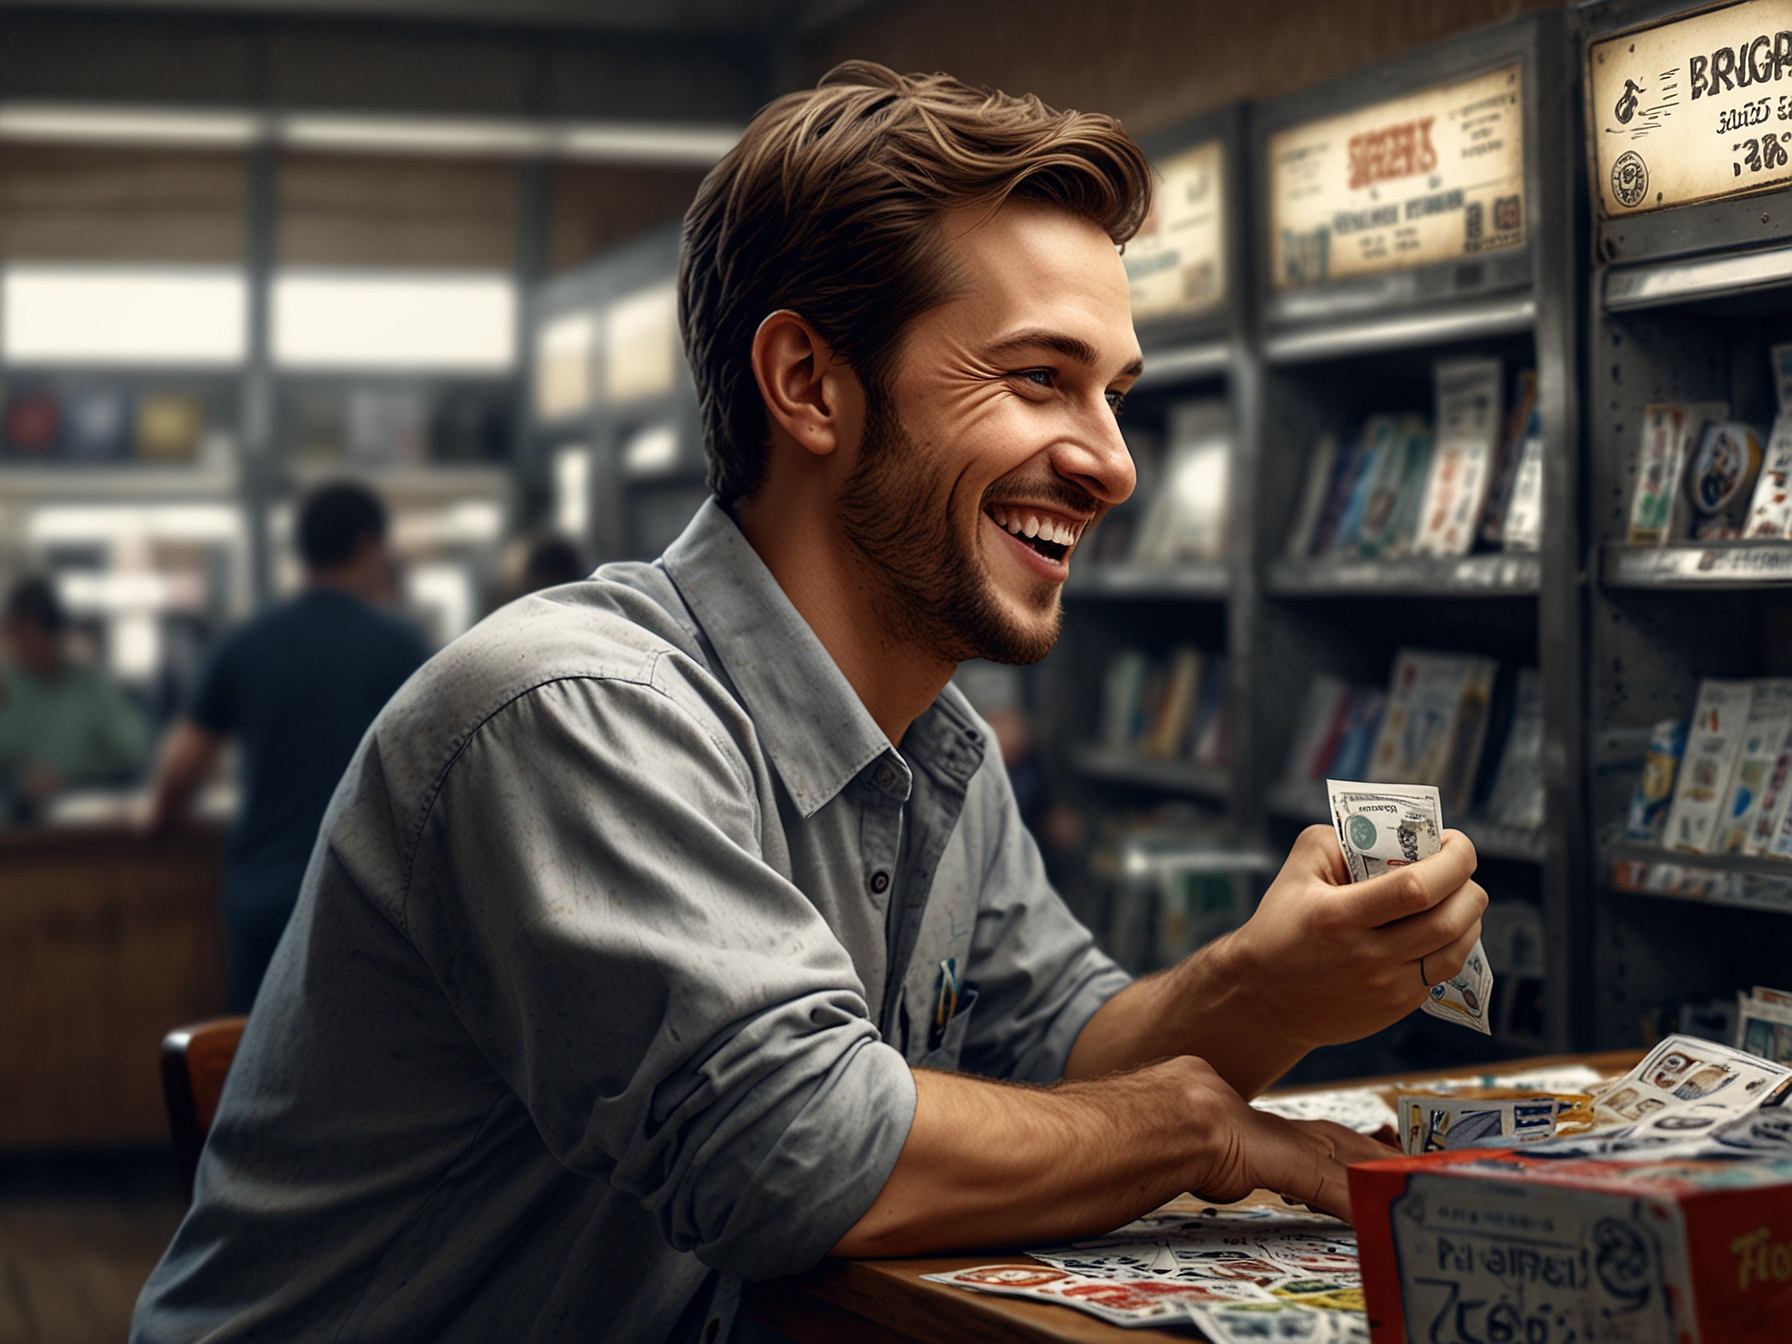 Image of a happy player scratching off a lottery ticket at a retail store, emphasizing the engaging and rewarding experience provided by the advanced gaming solutions.